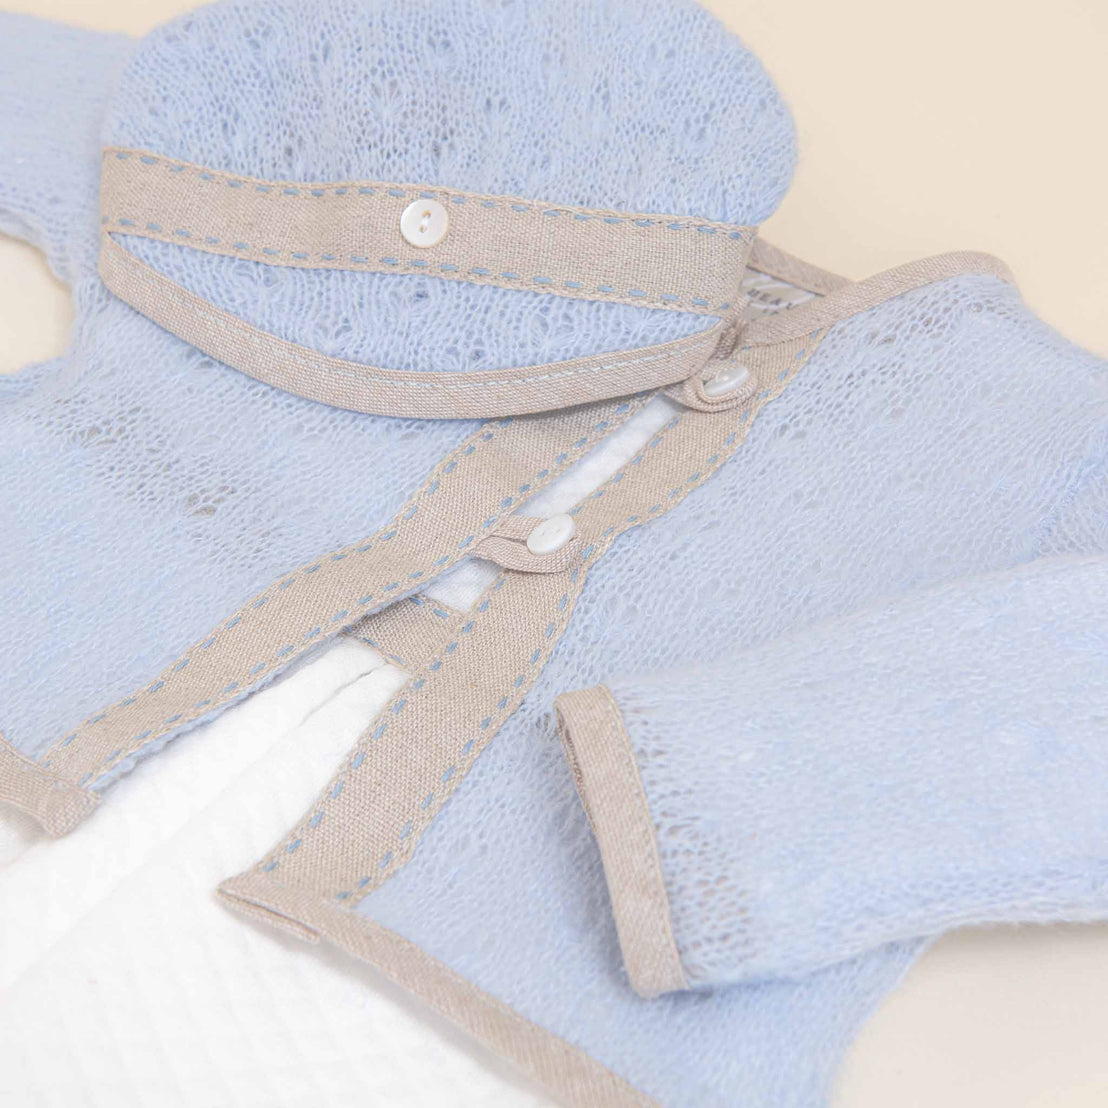 A close-up image of a baby's Austin Sweater with a beige trim and intricate fabric details, showcasing buttons and textures.